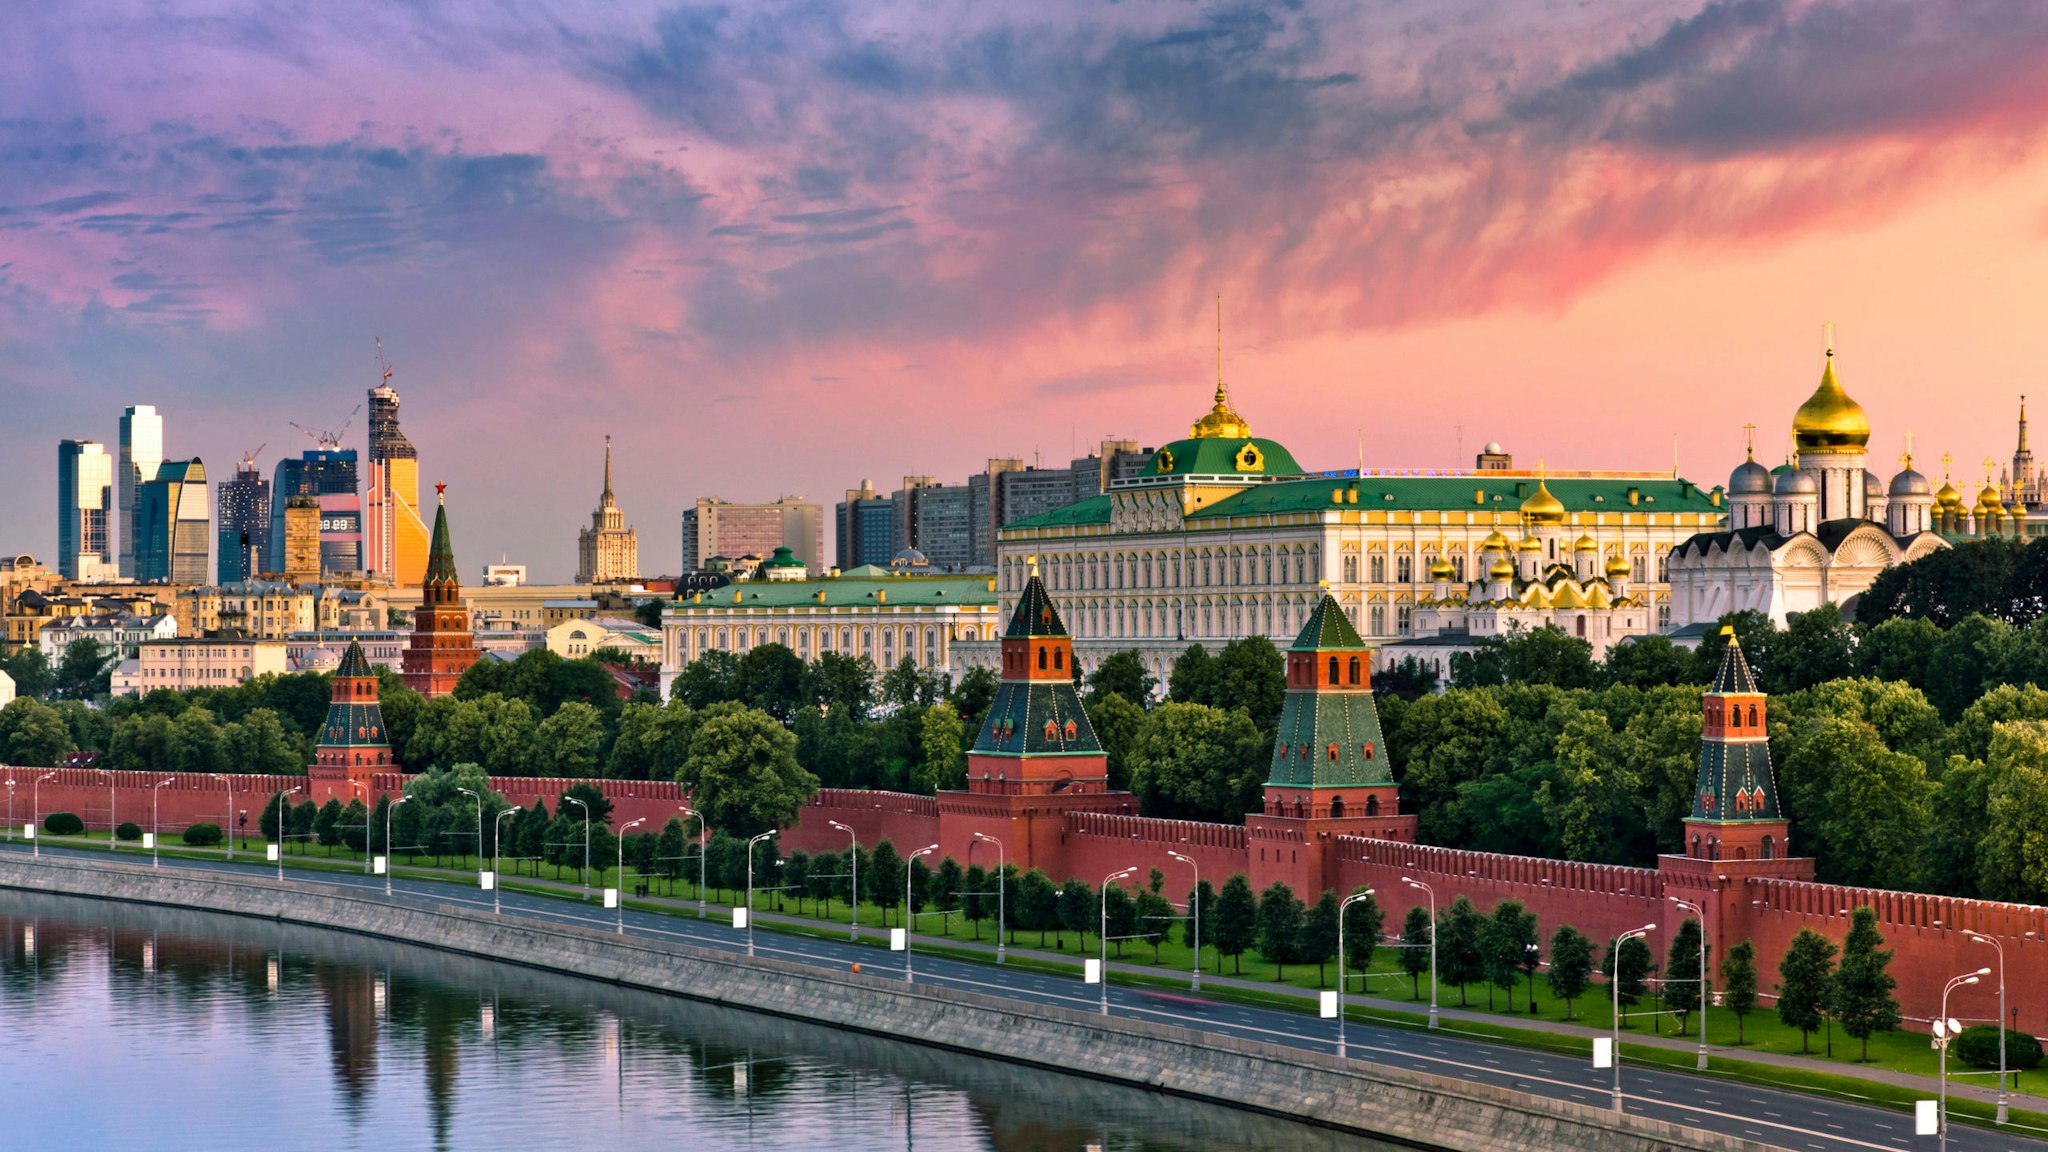 View of the Moskva River along the Kremlin wall in Moscow, Russia, with water and a walkway in the foreground and a beautiful sunset sky in the background. The image shows the Grand Kremlin Palace and the cathedrals of the Moscow Kremlin. The view is from the top of the Hotel Baltschug Kempinski.